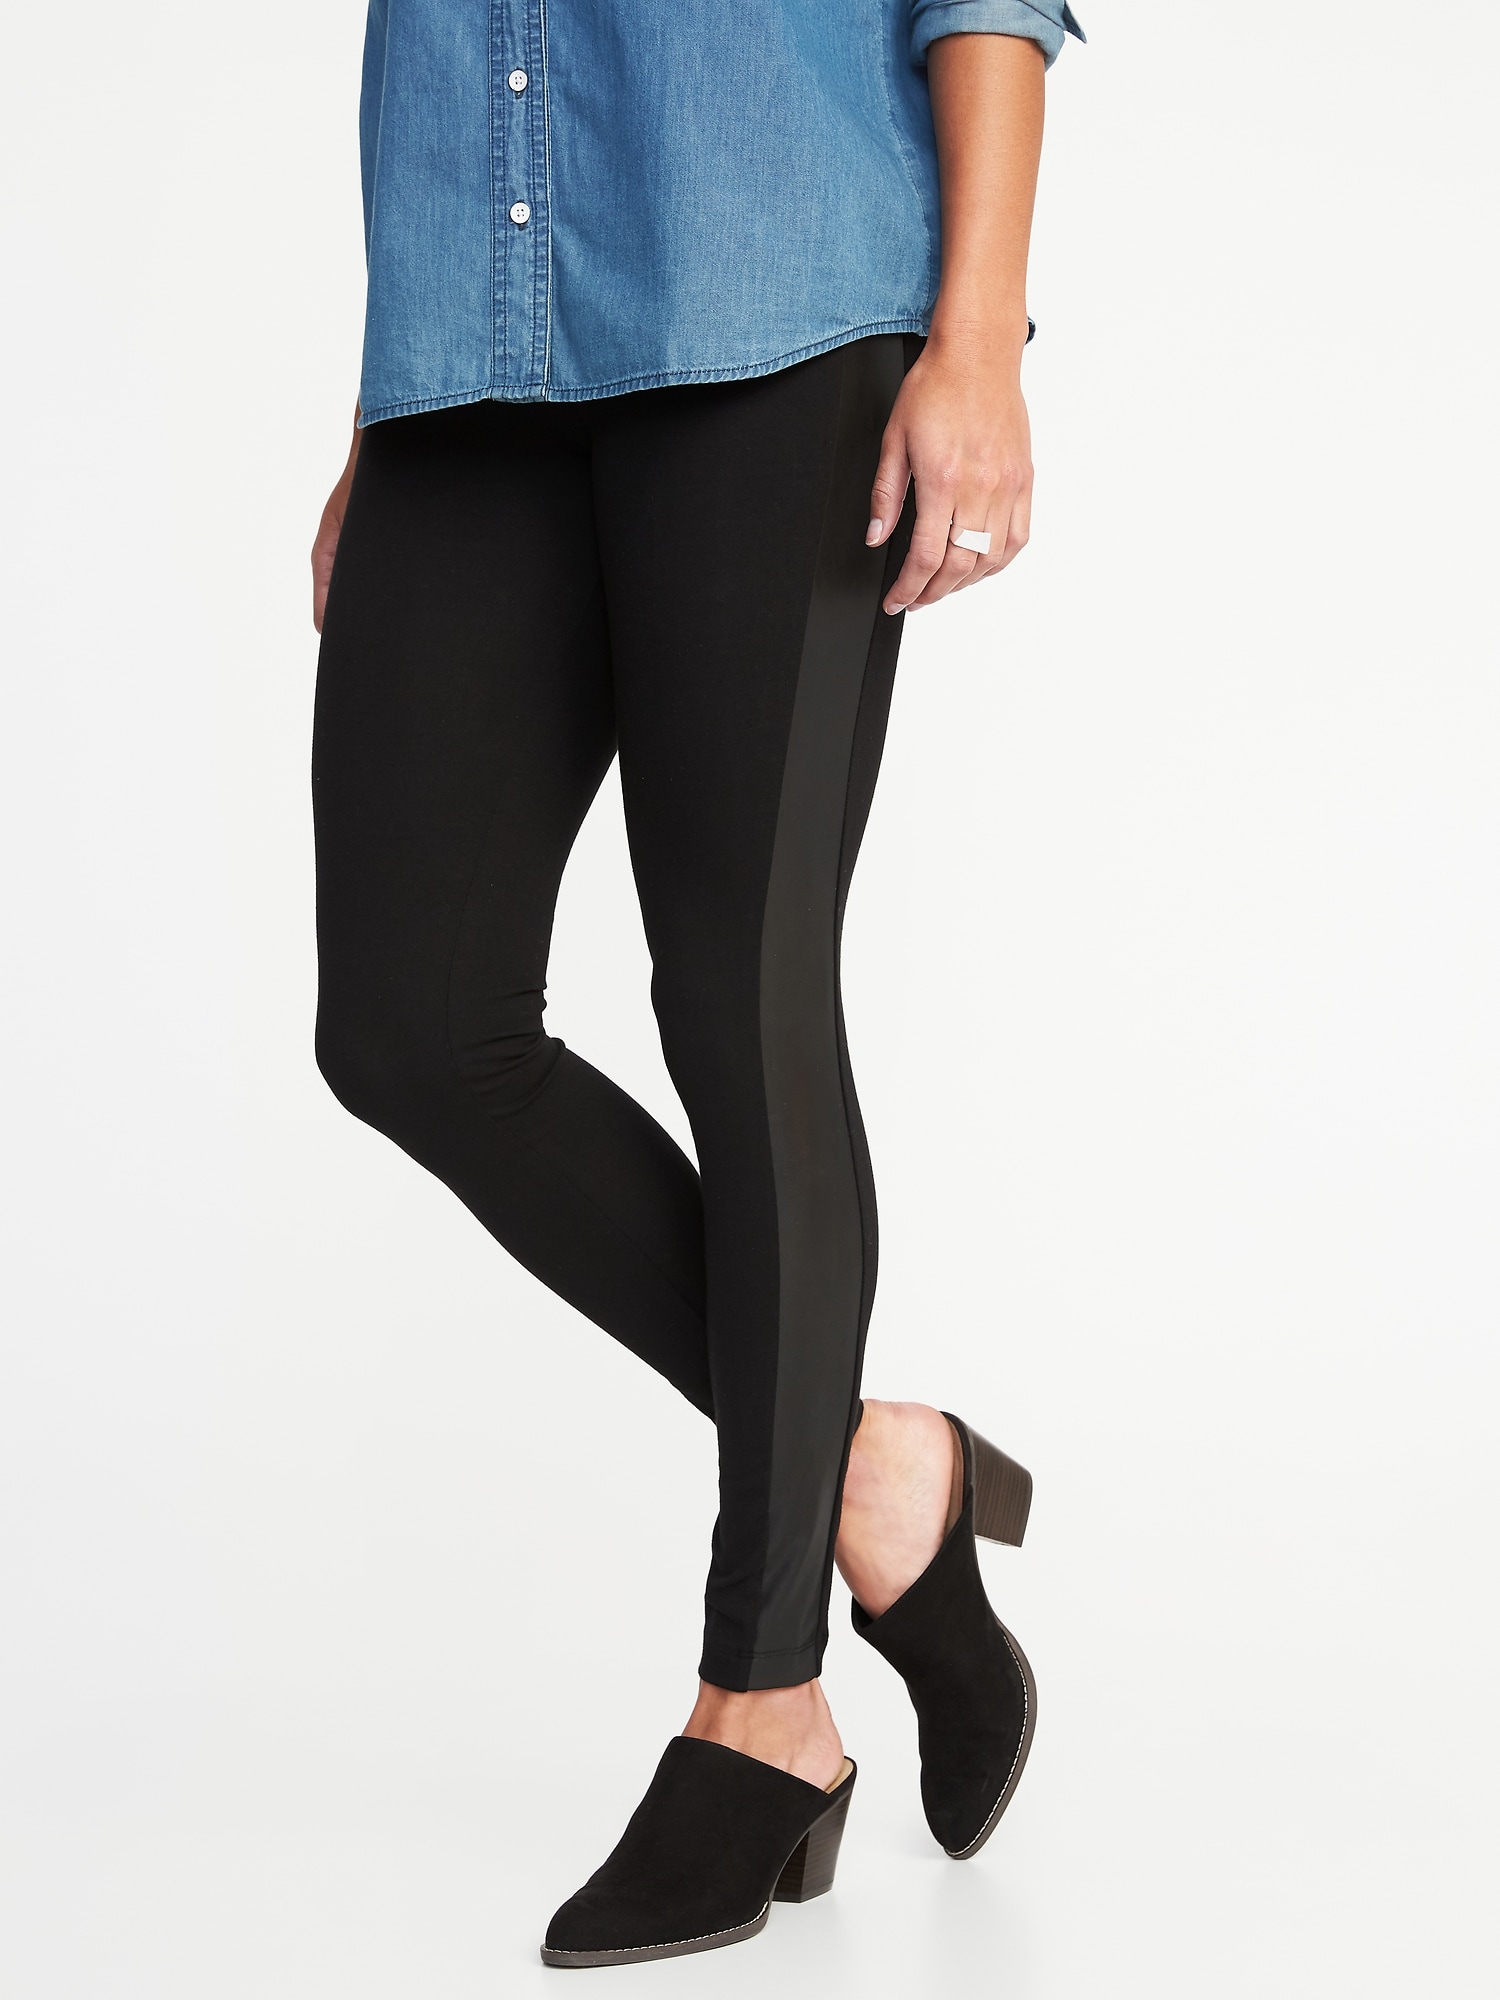 Freddy 7/8 Ankle Faux Leather Mid-Rise Leggings | Black